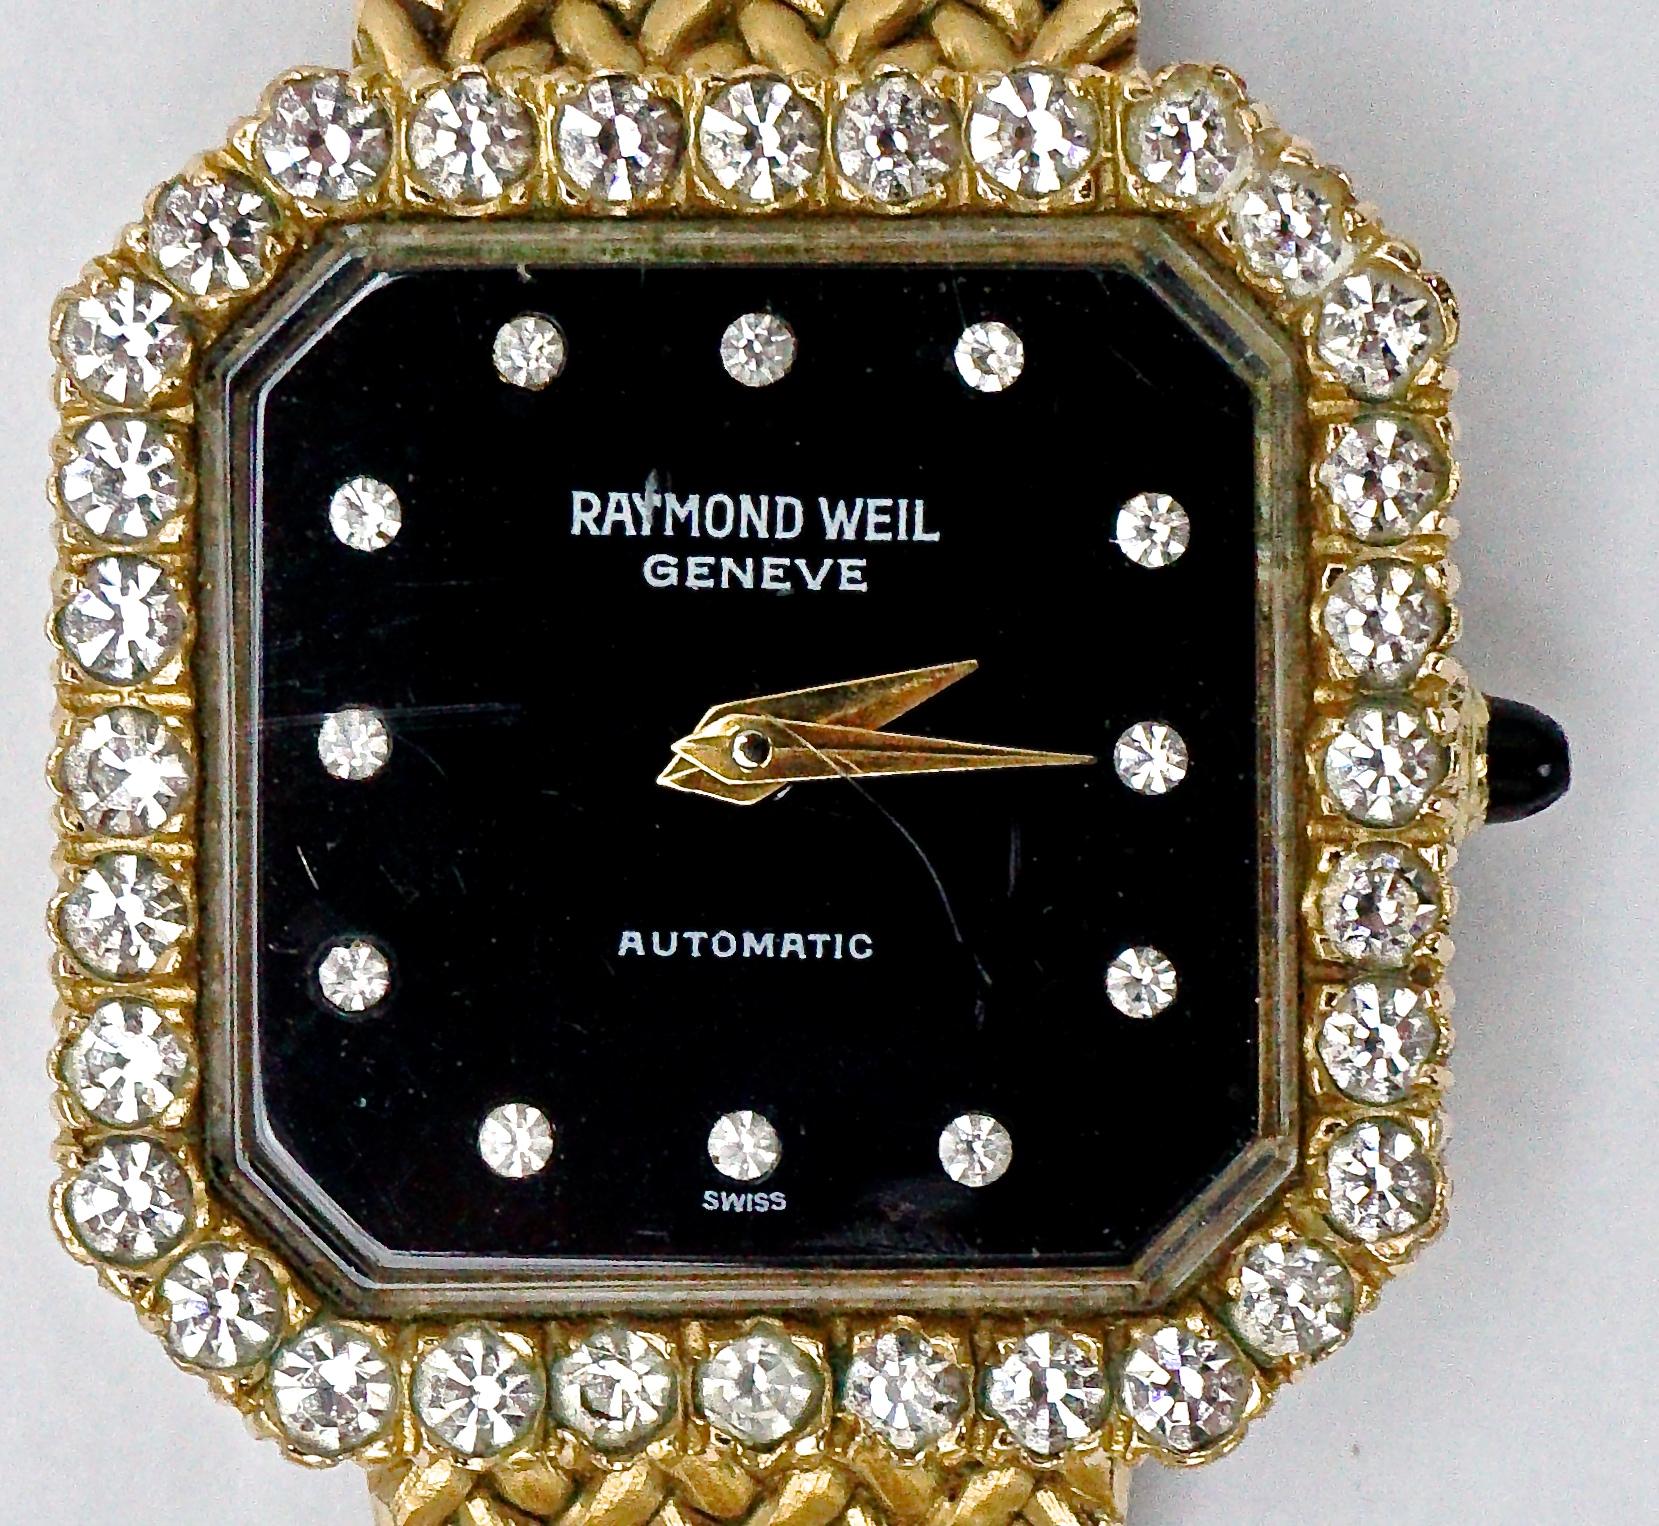 Raymond Weil Geneve automatic Swiss gold plated watch in good working condition, with a herringbone design adjustable band, and black face with rhinestones for numbers. The face also has a rhinestone surround. Measuring length 20cm / 7.87 inches by